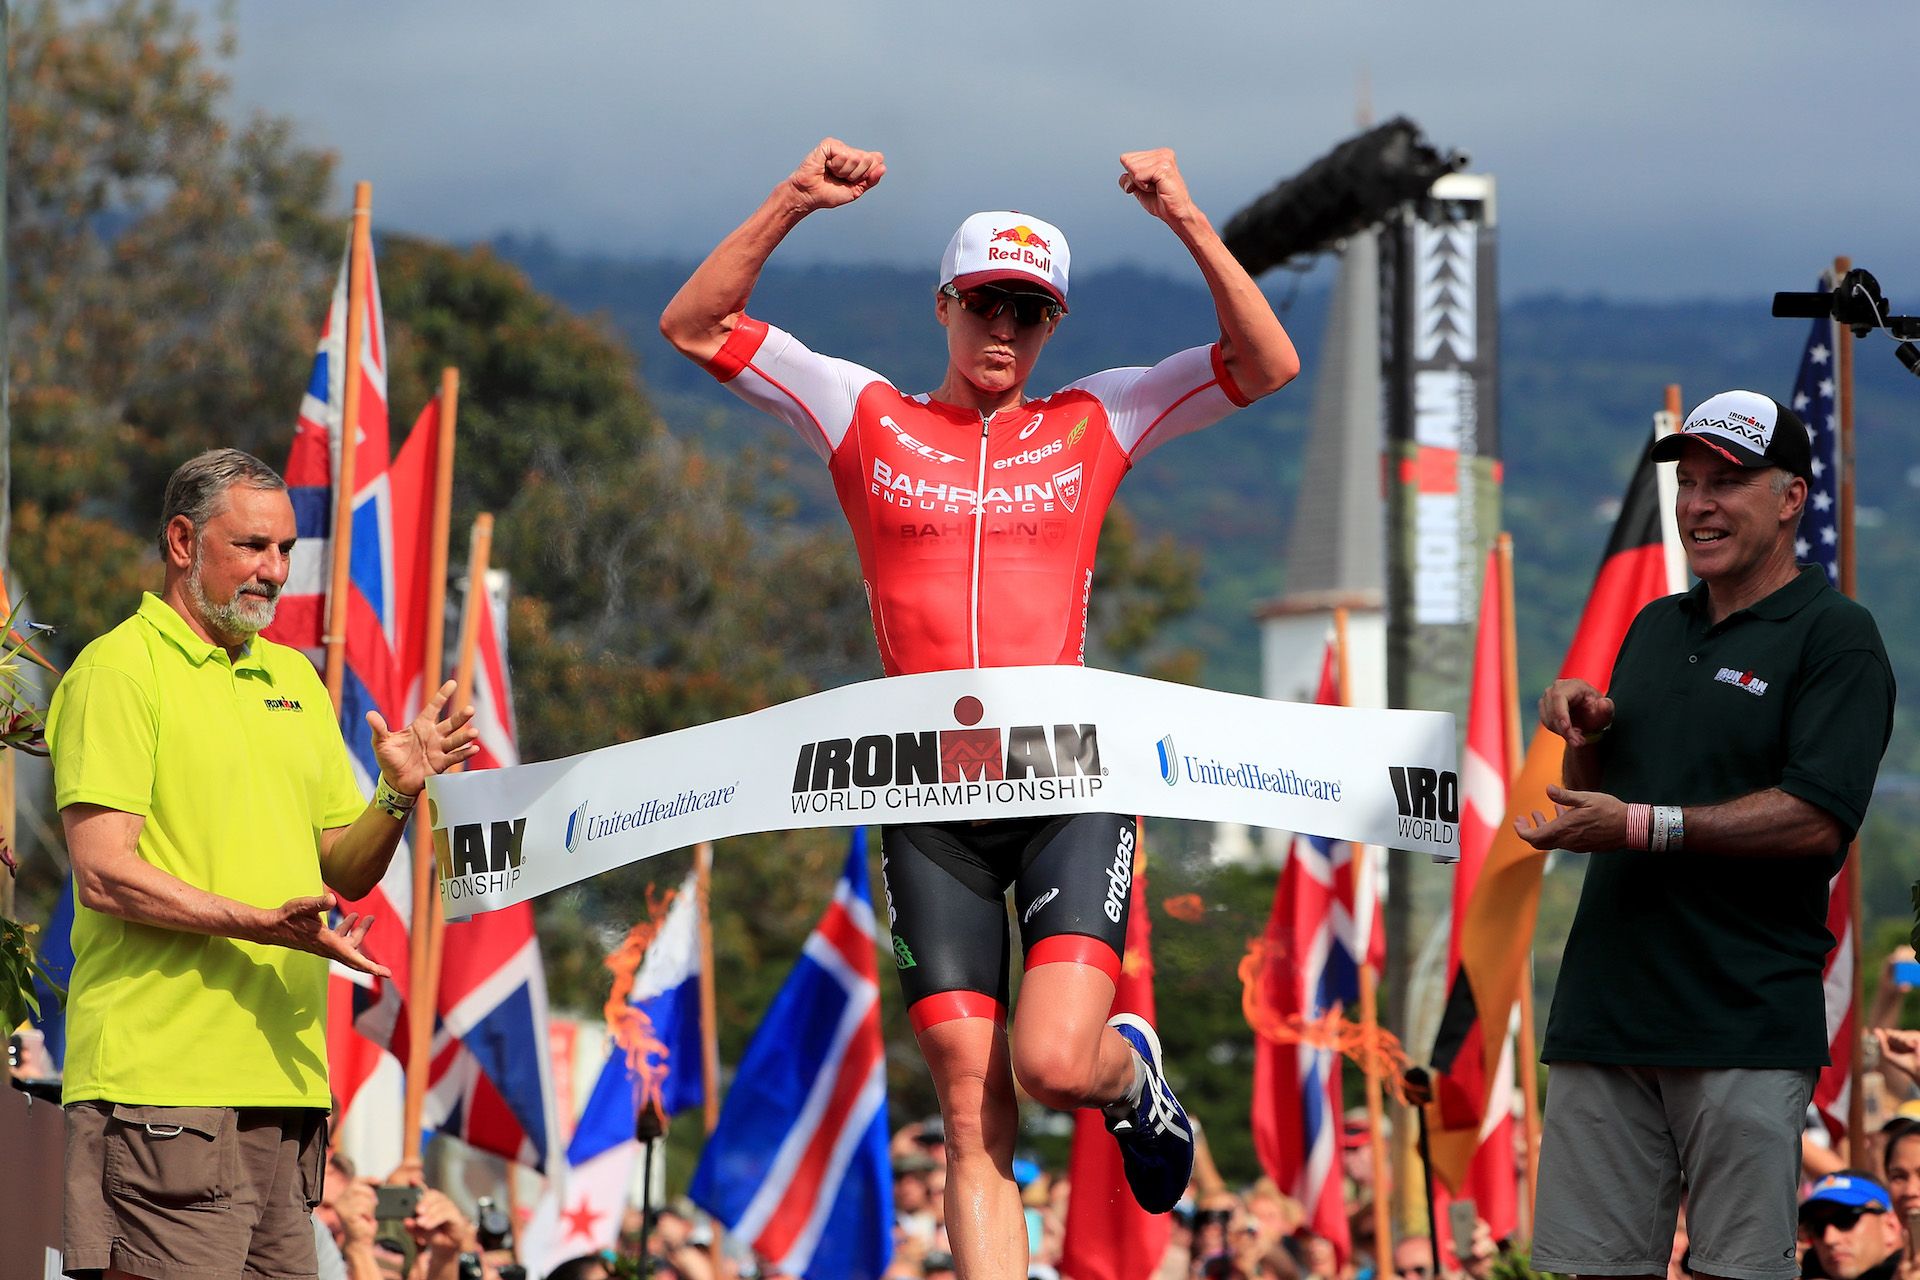 Photo by Tom Pennington/Getty Images for Ironman